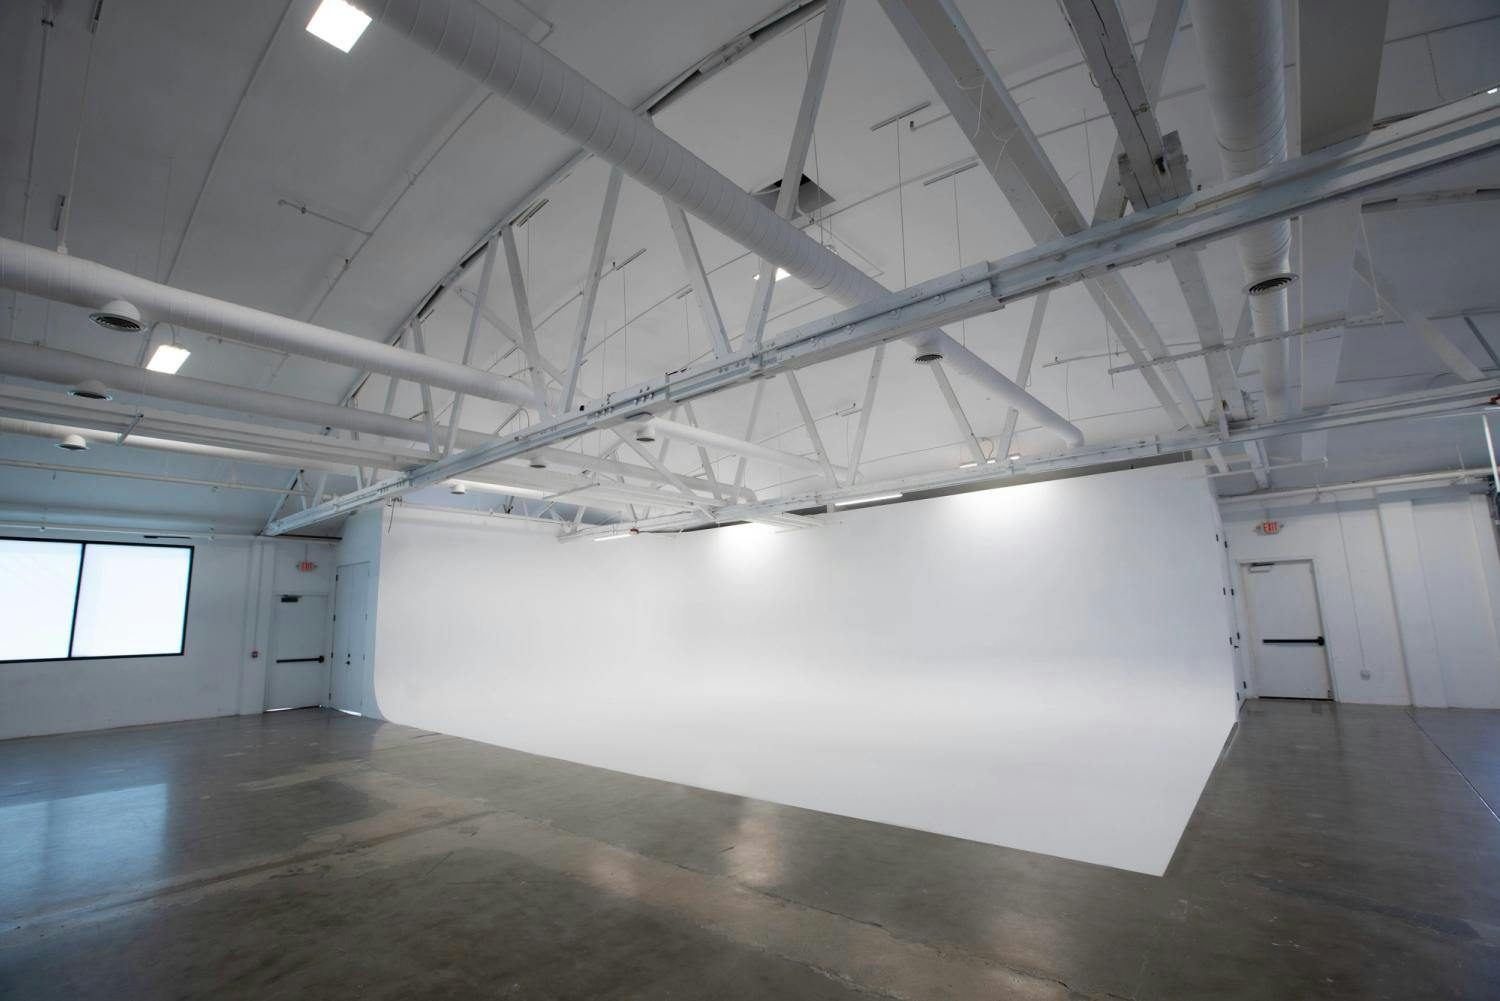 An expansive white cyclorama wall within a spacious studio with industrial white ceilings and ductwork, designed for professional photography and video productions.